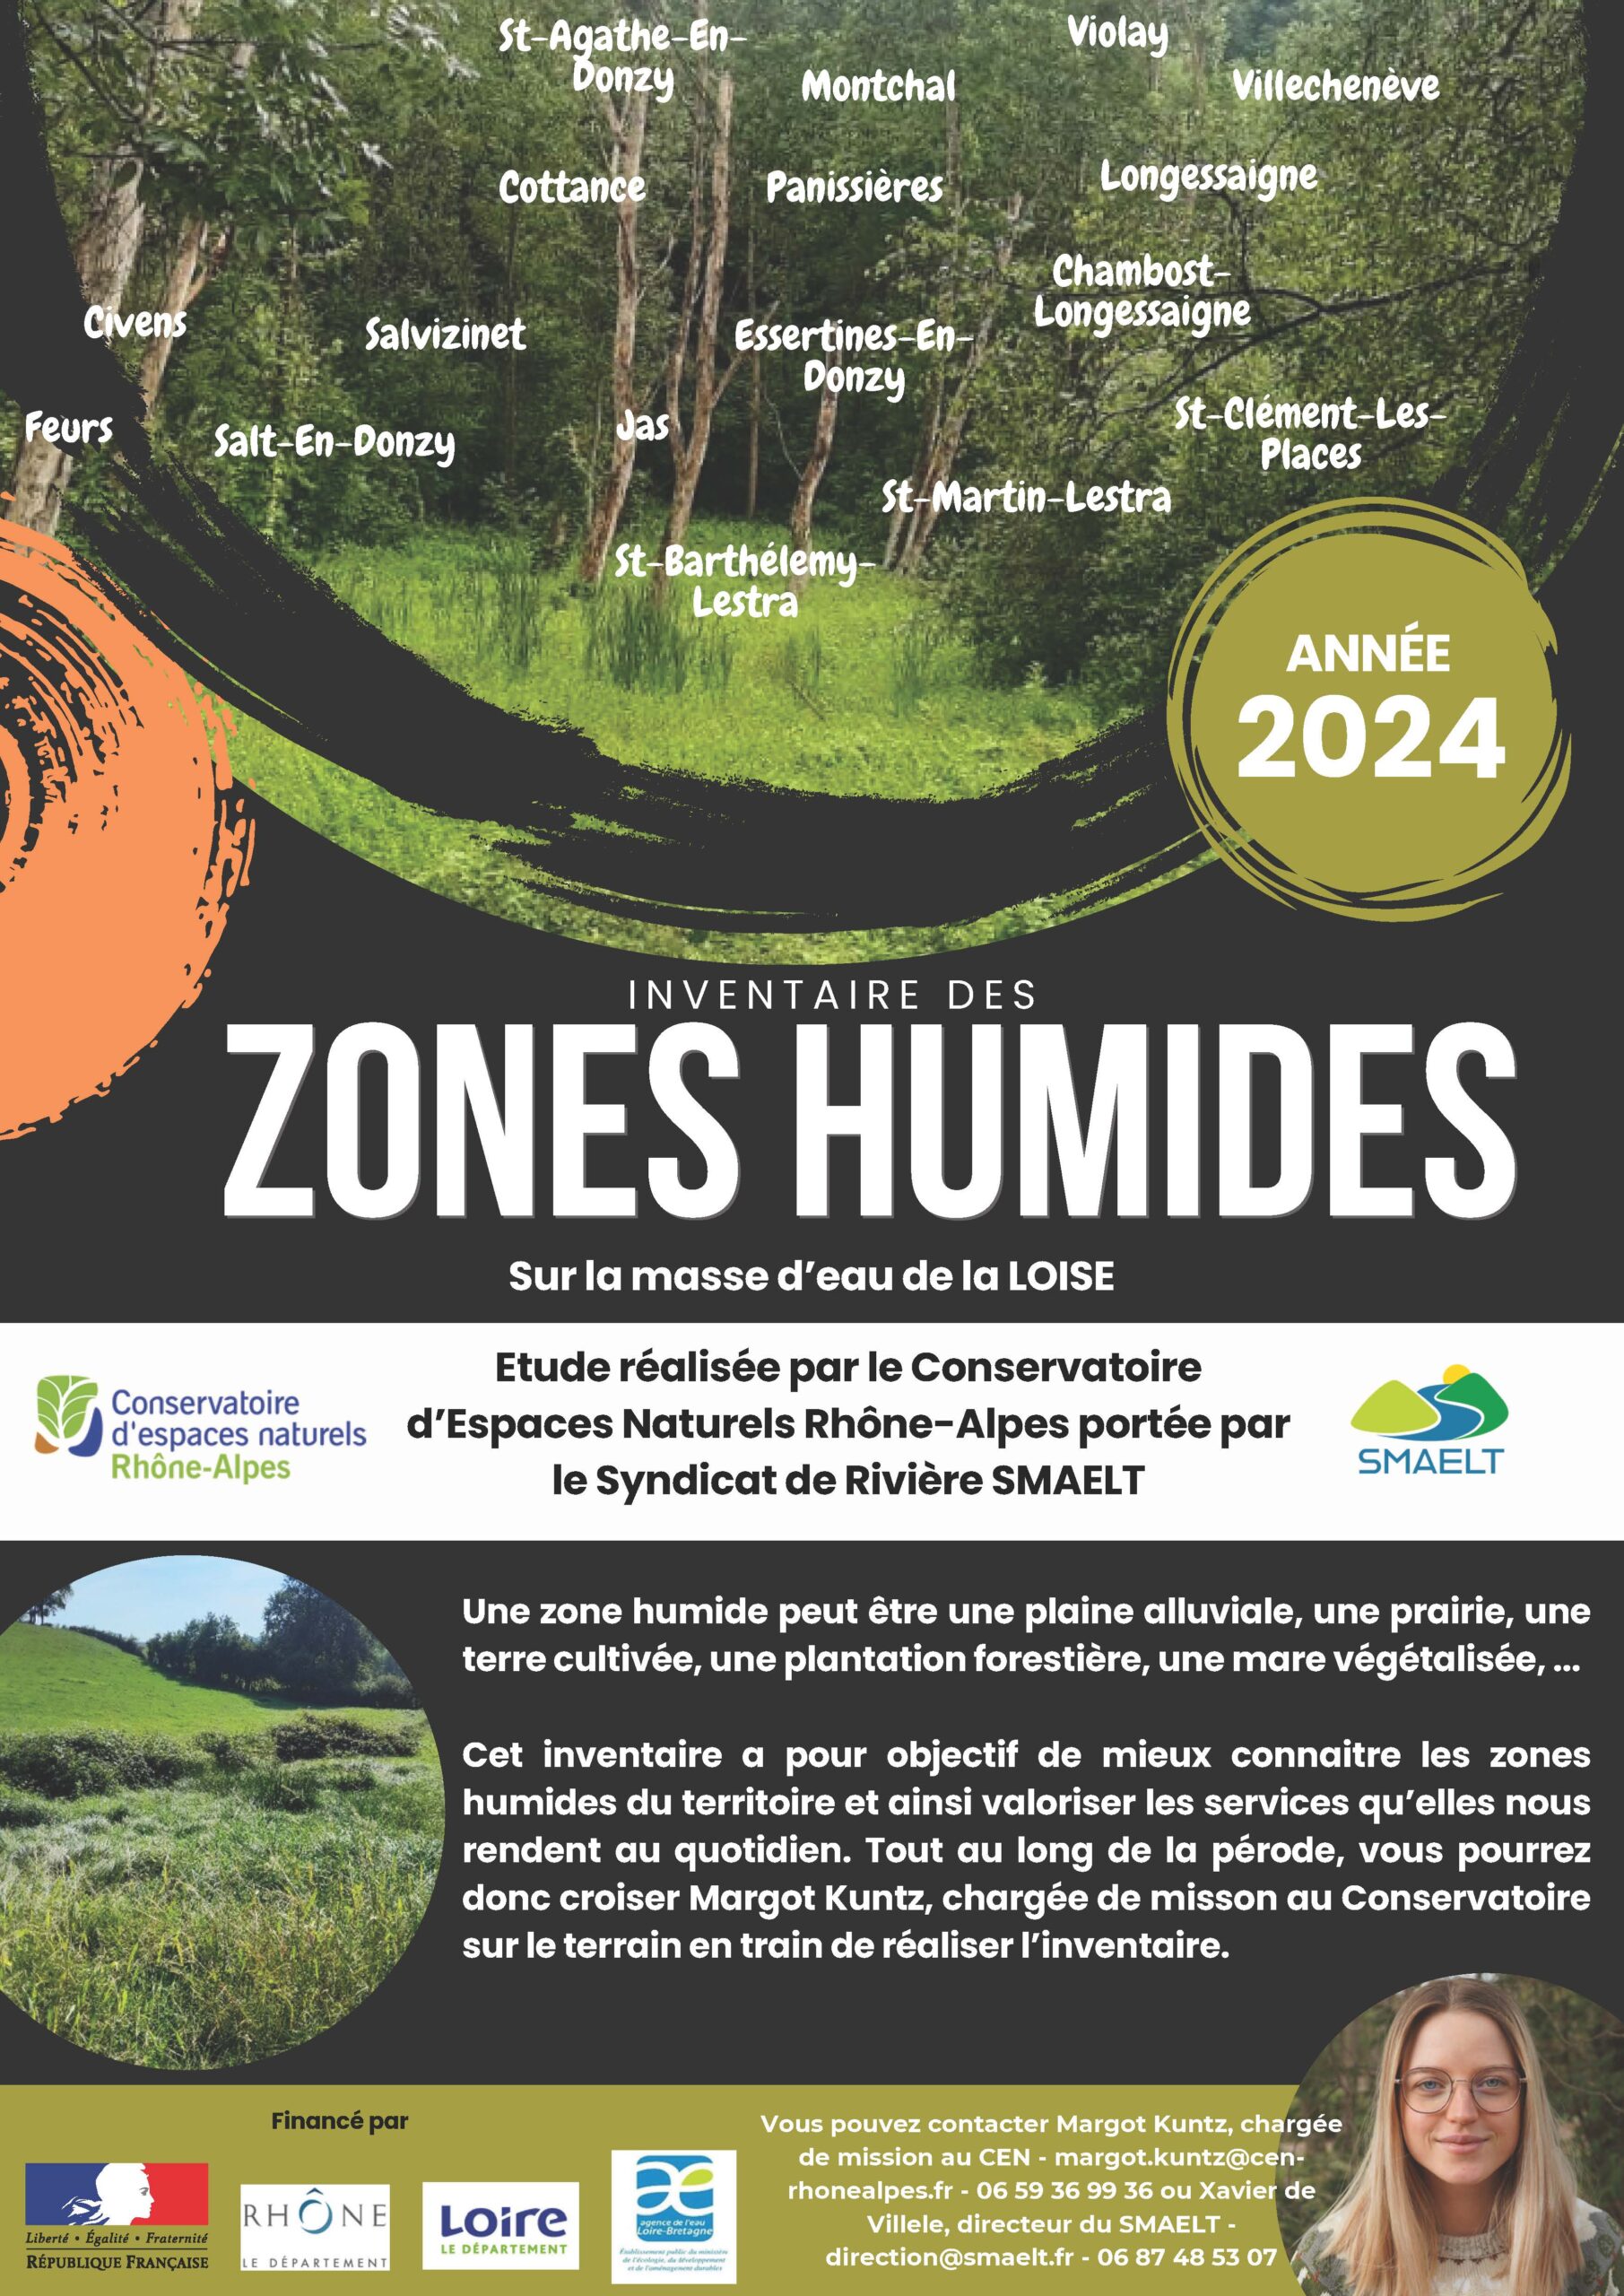 You are currently viewing Inventaire des zones humides 2024 – SMAELT